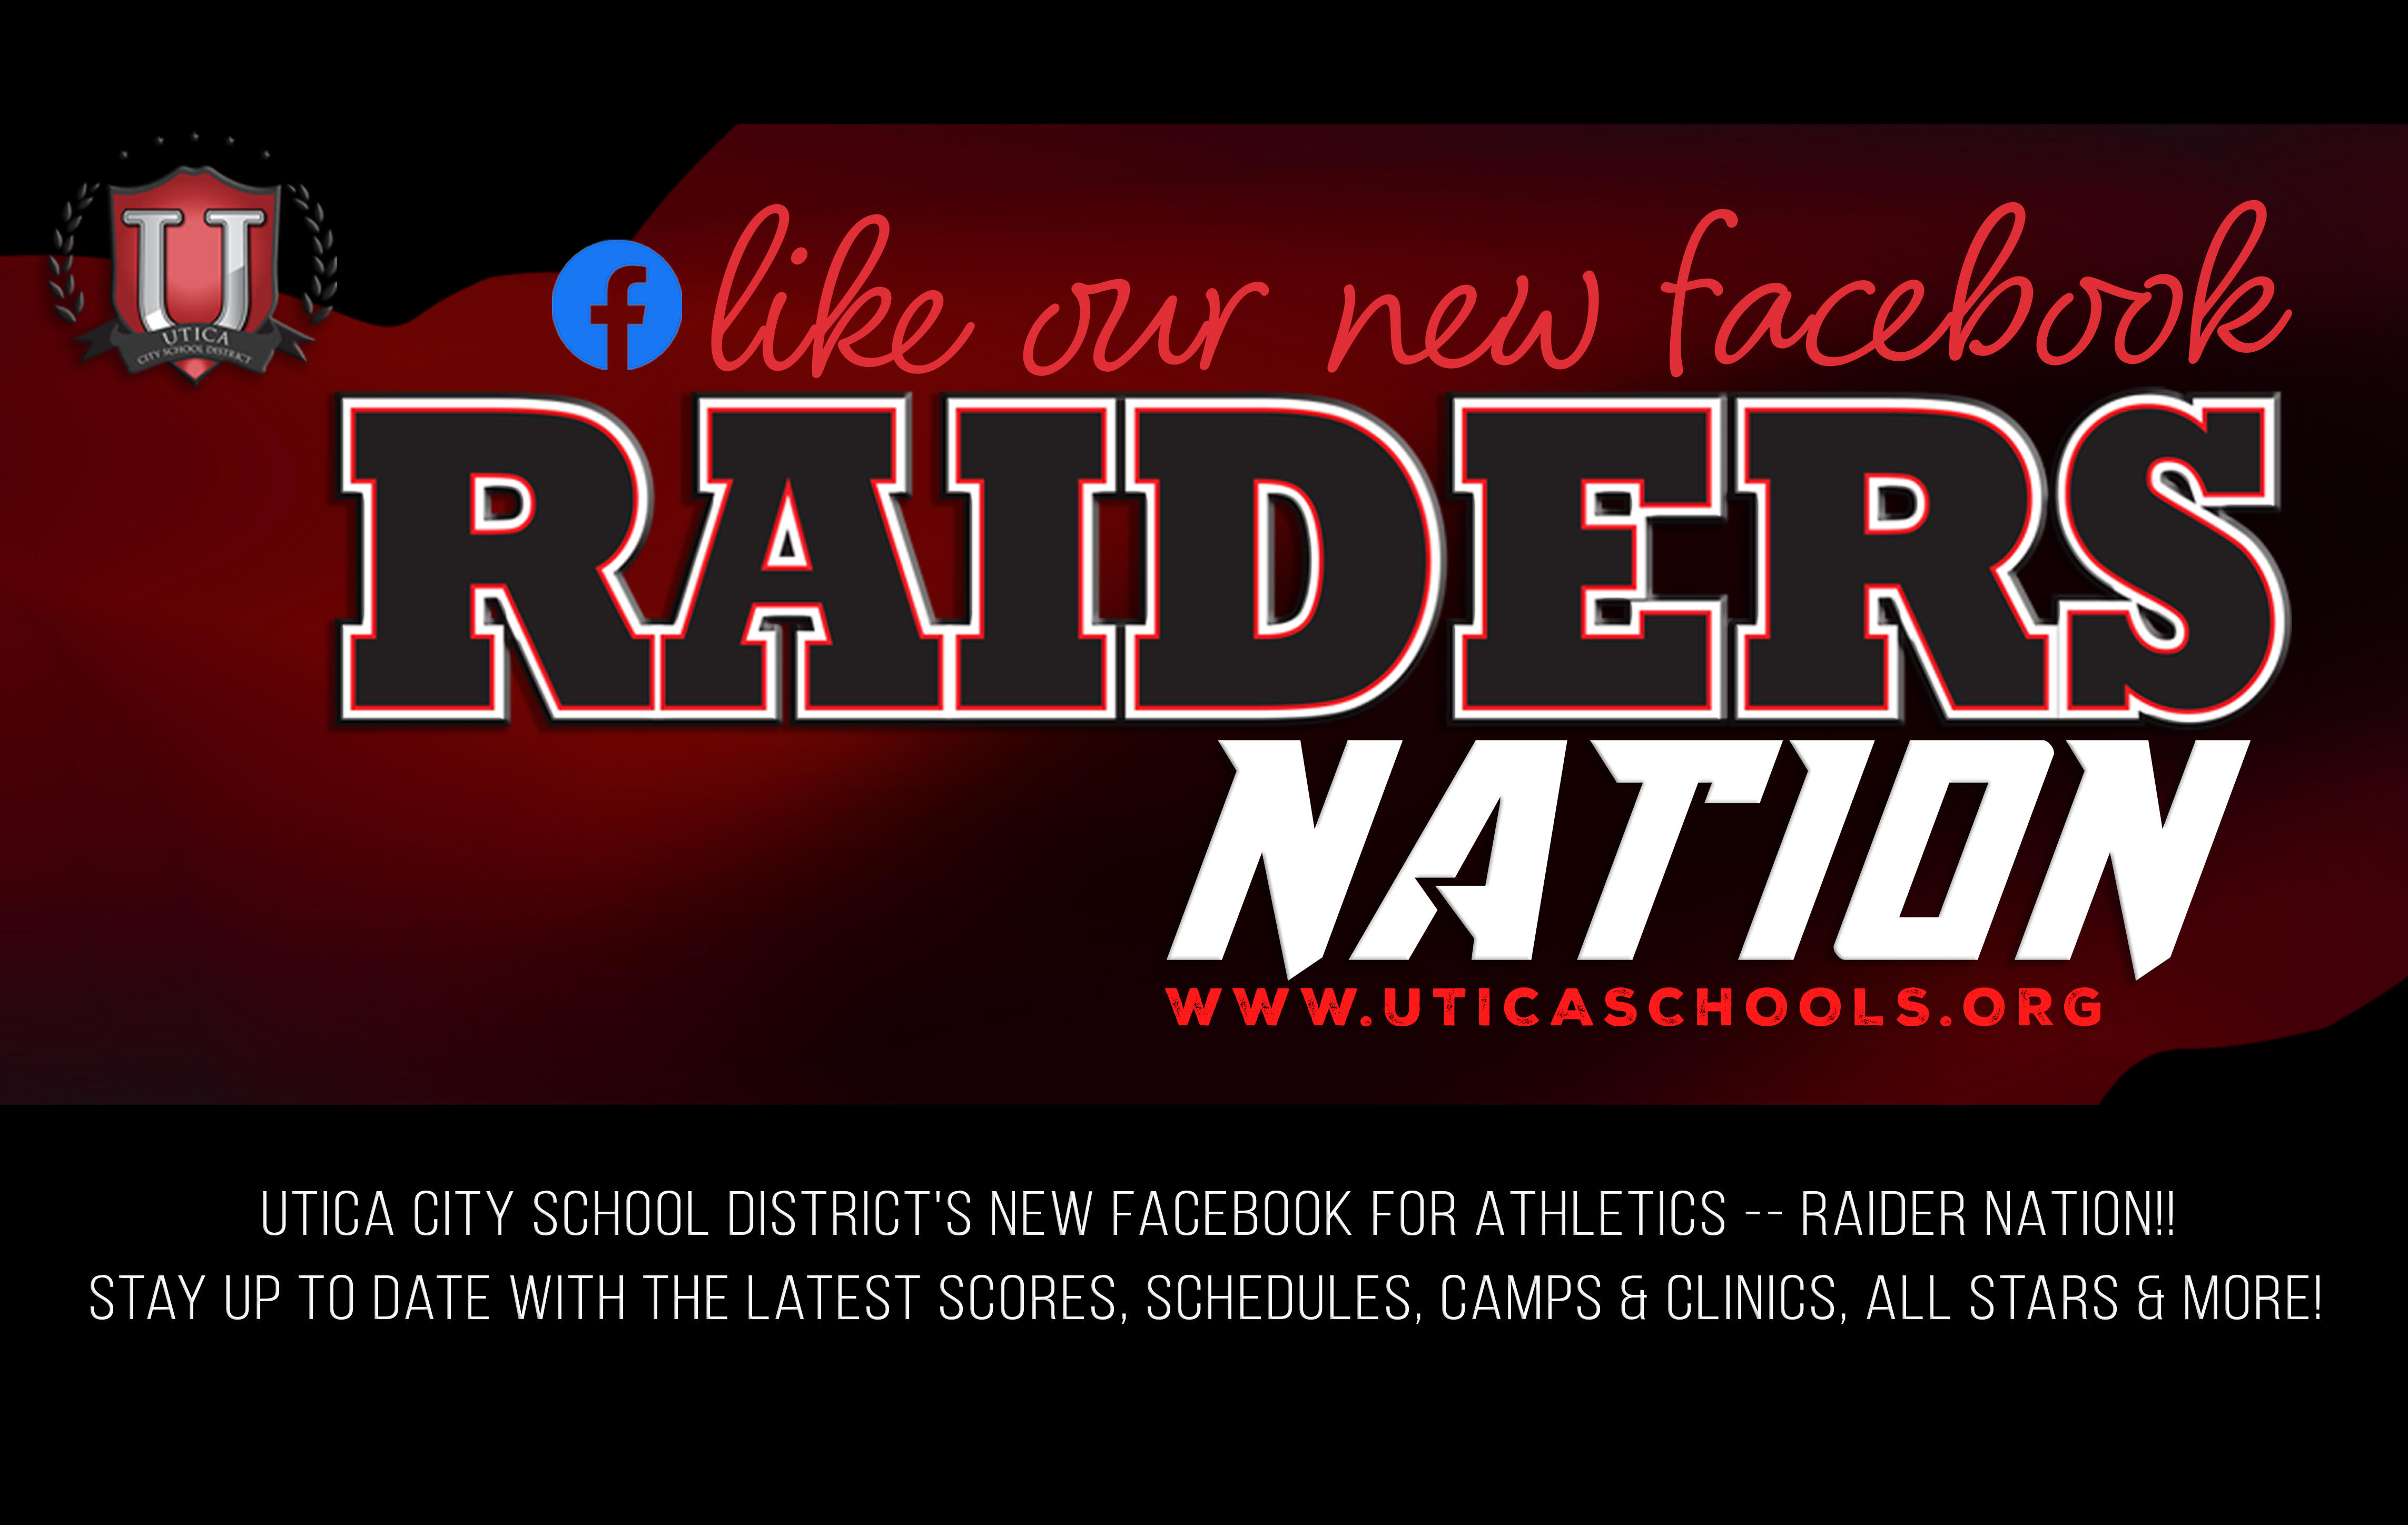 Raiders Nation Facebook page information